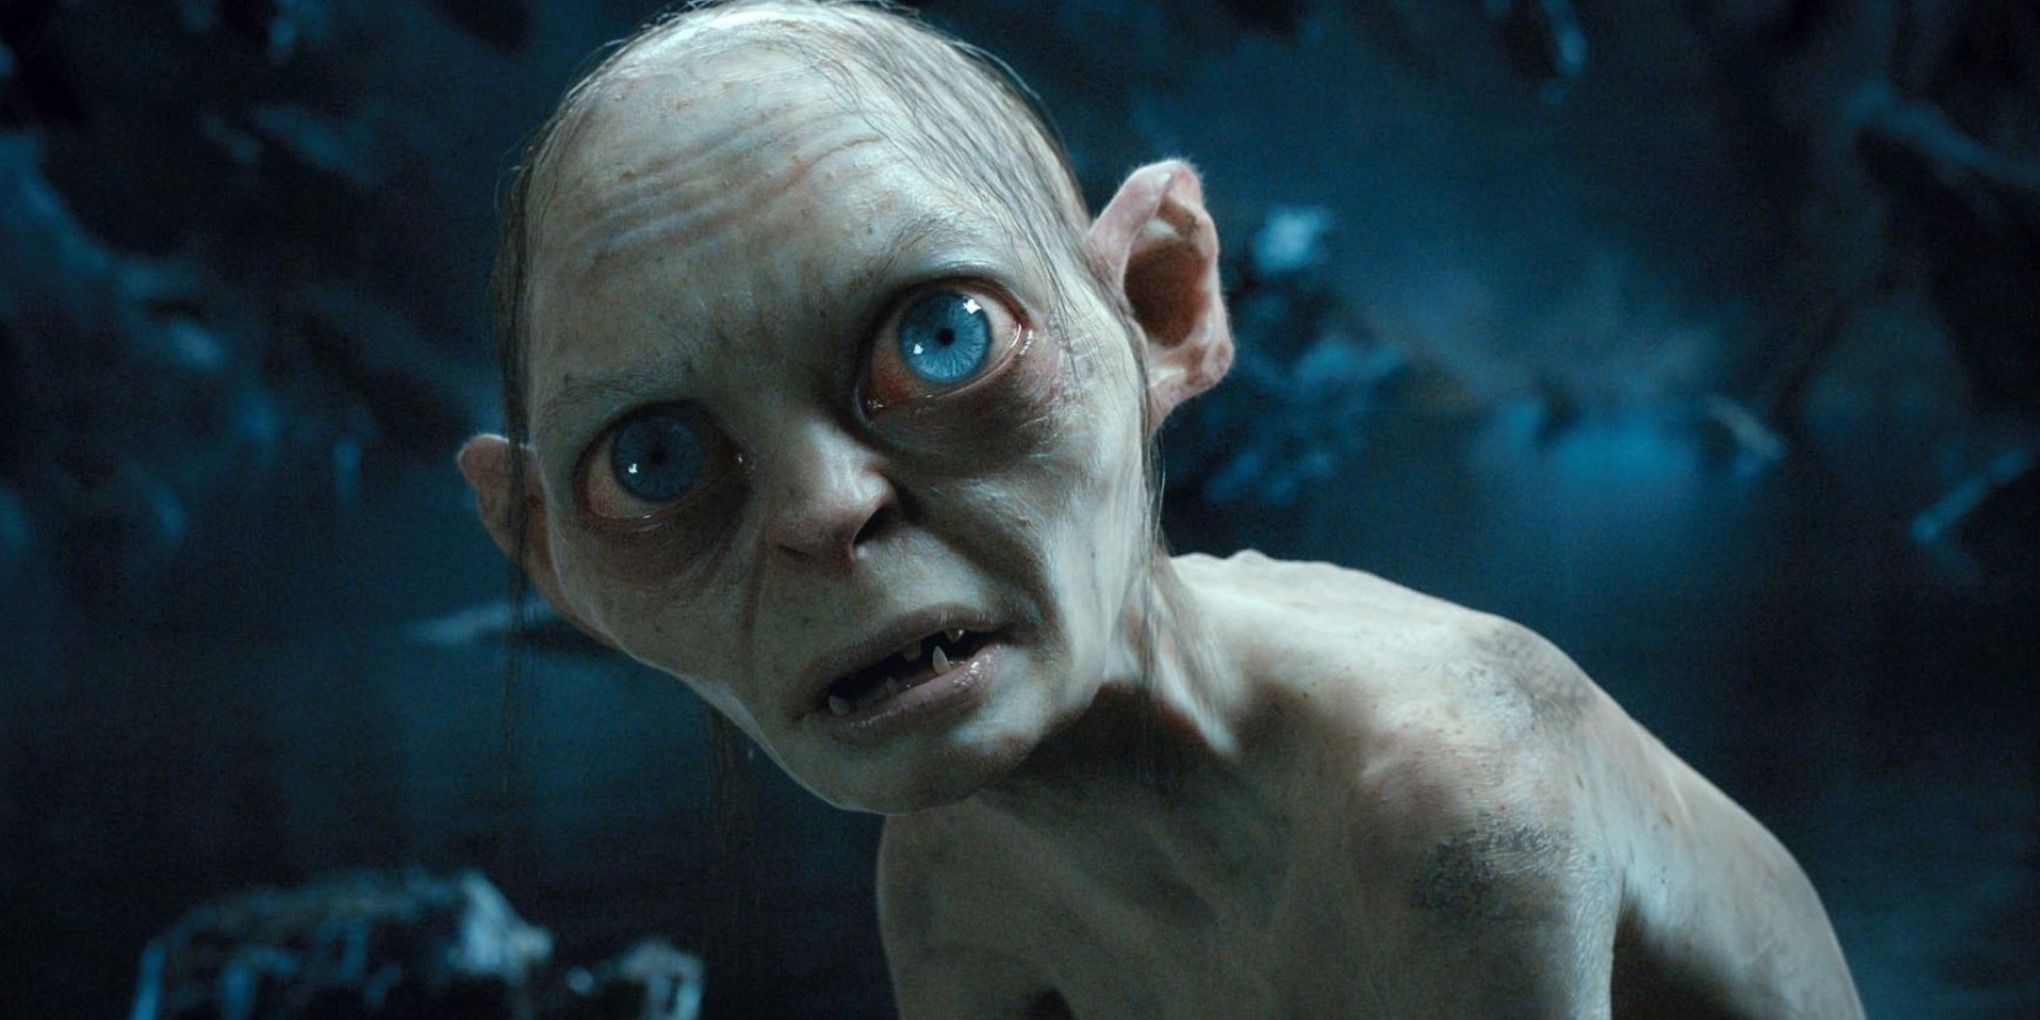 Gollum's Introduction in The Hobbit An Unexpected Journey